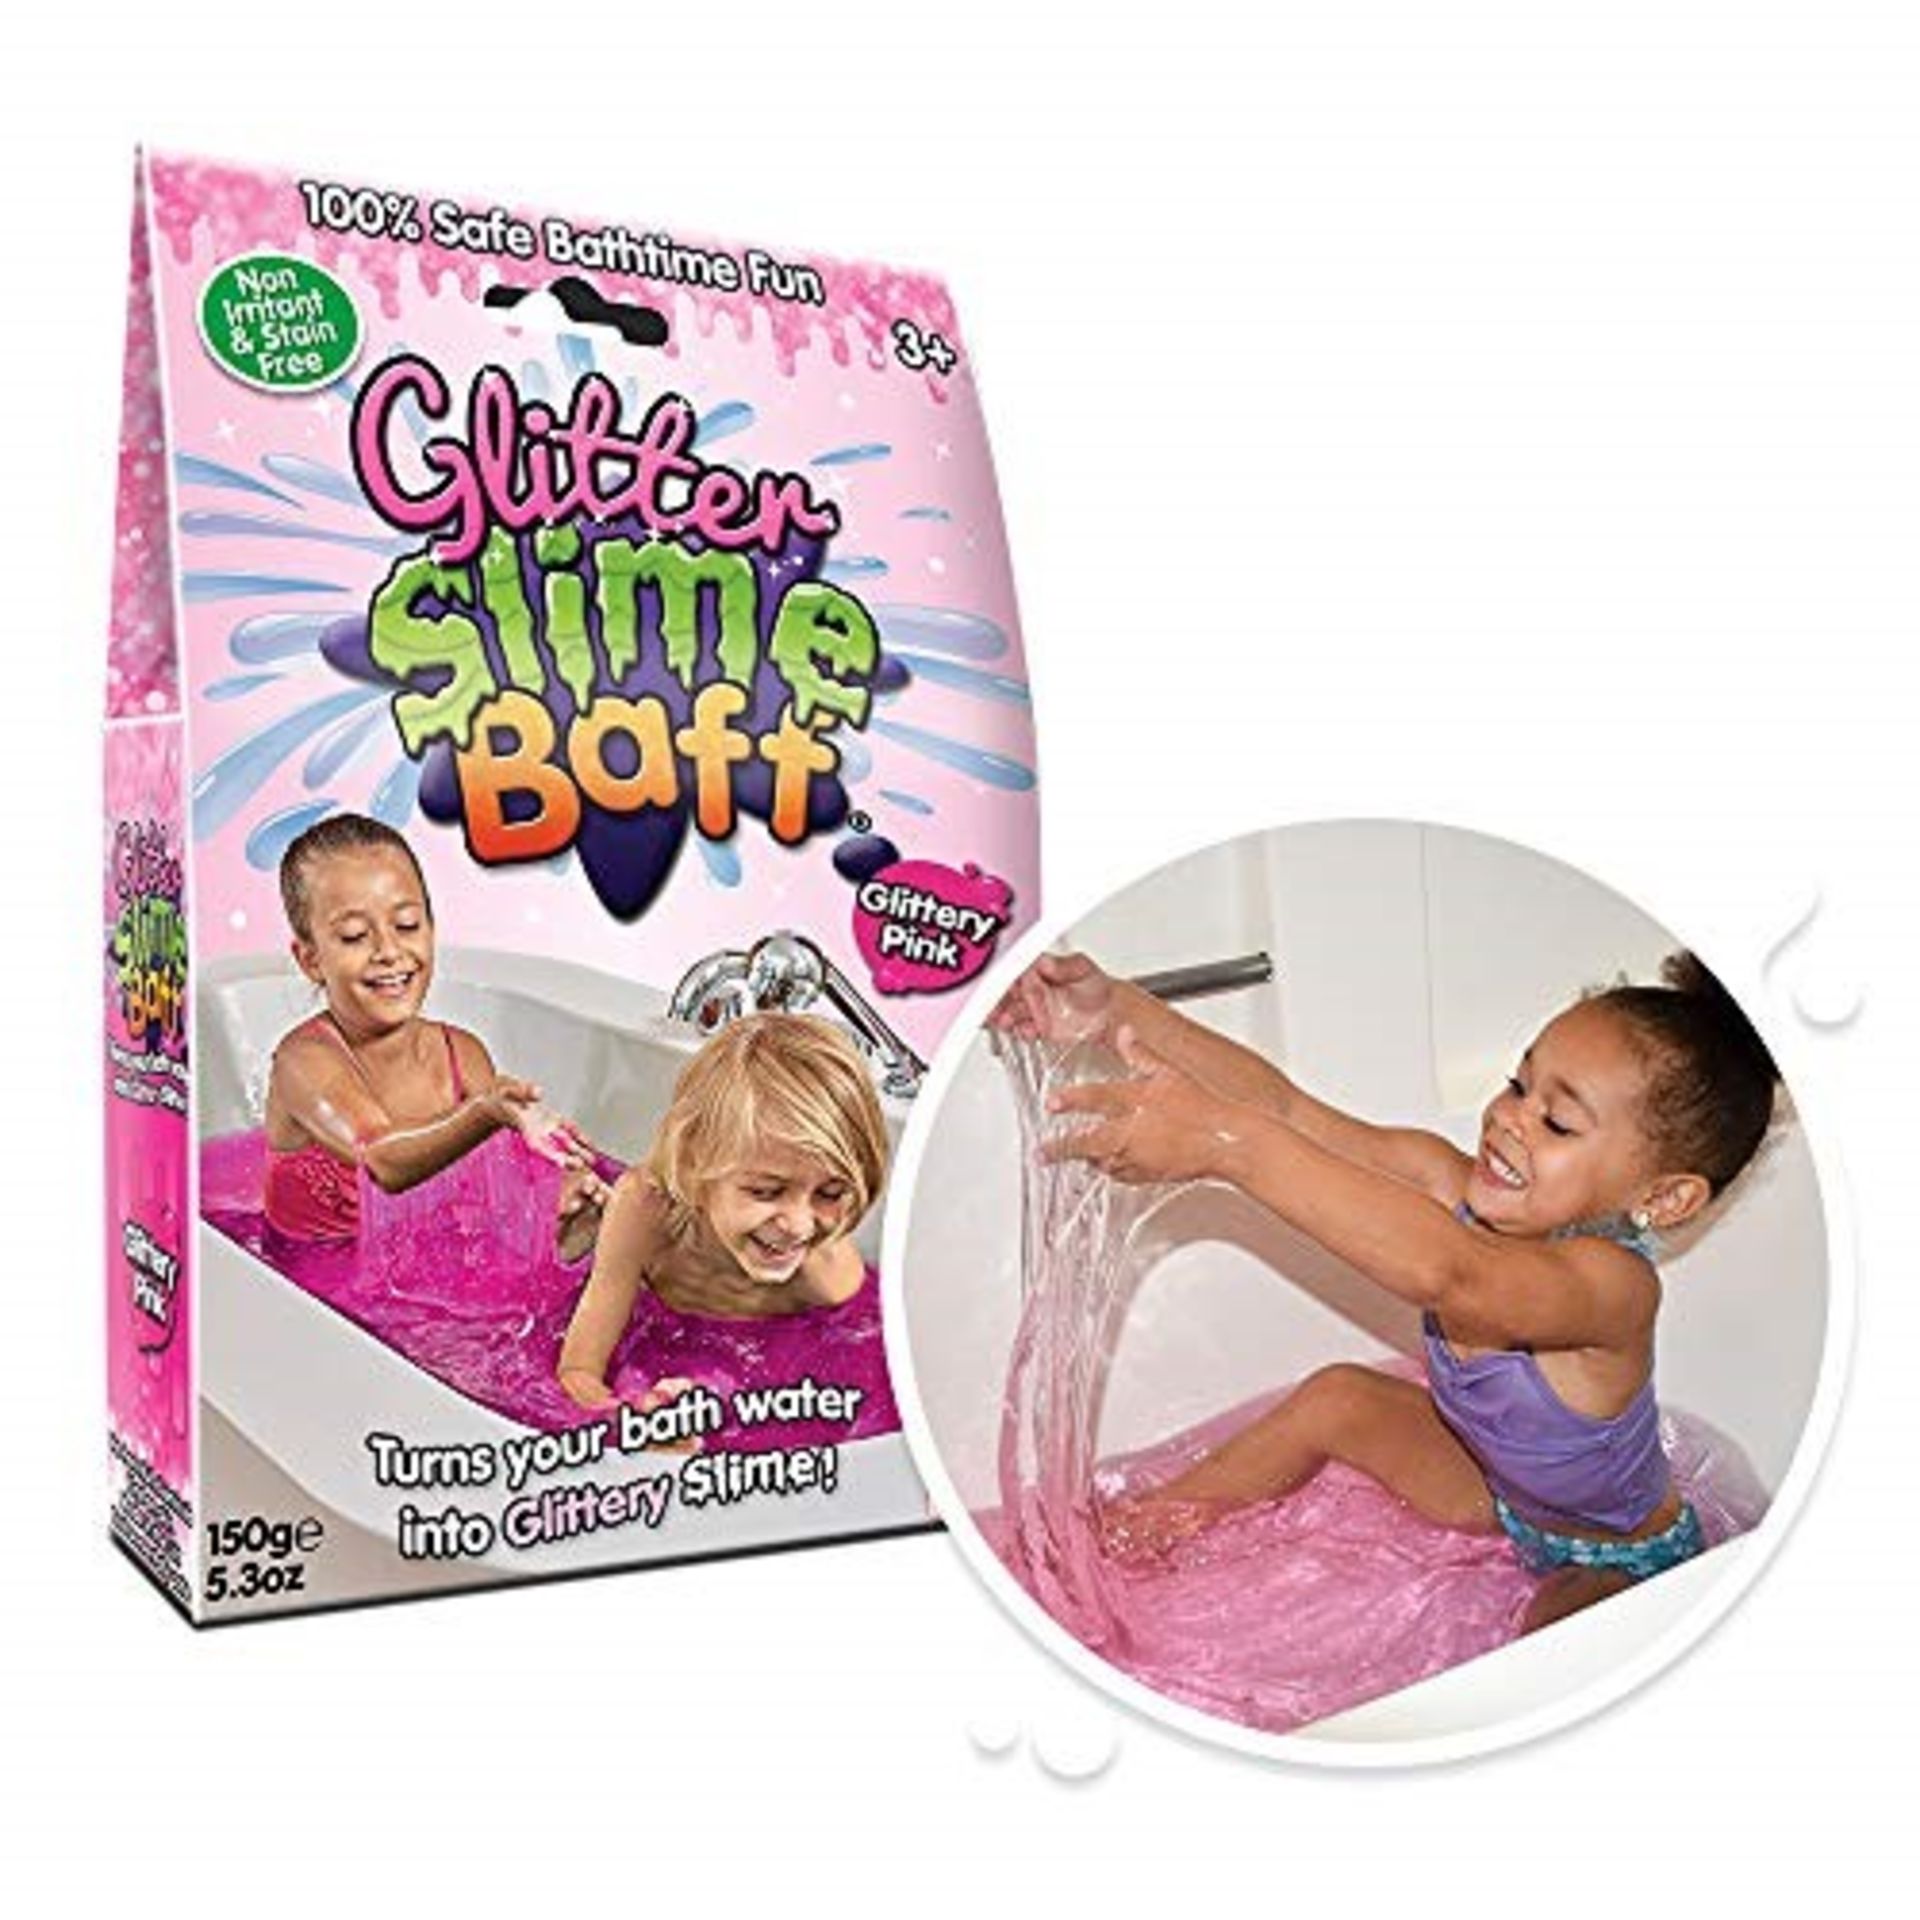 Glitter Slime Baff Pink from Zimpli Kids, Turns water into gooey, colourful slime, Mak